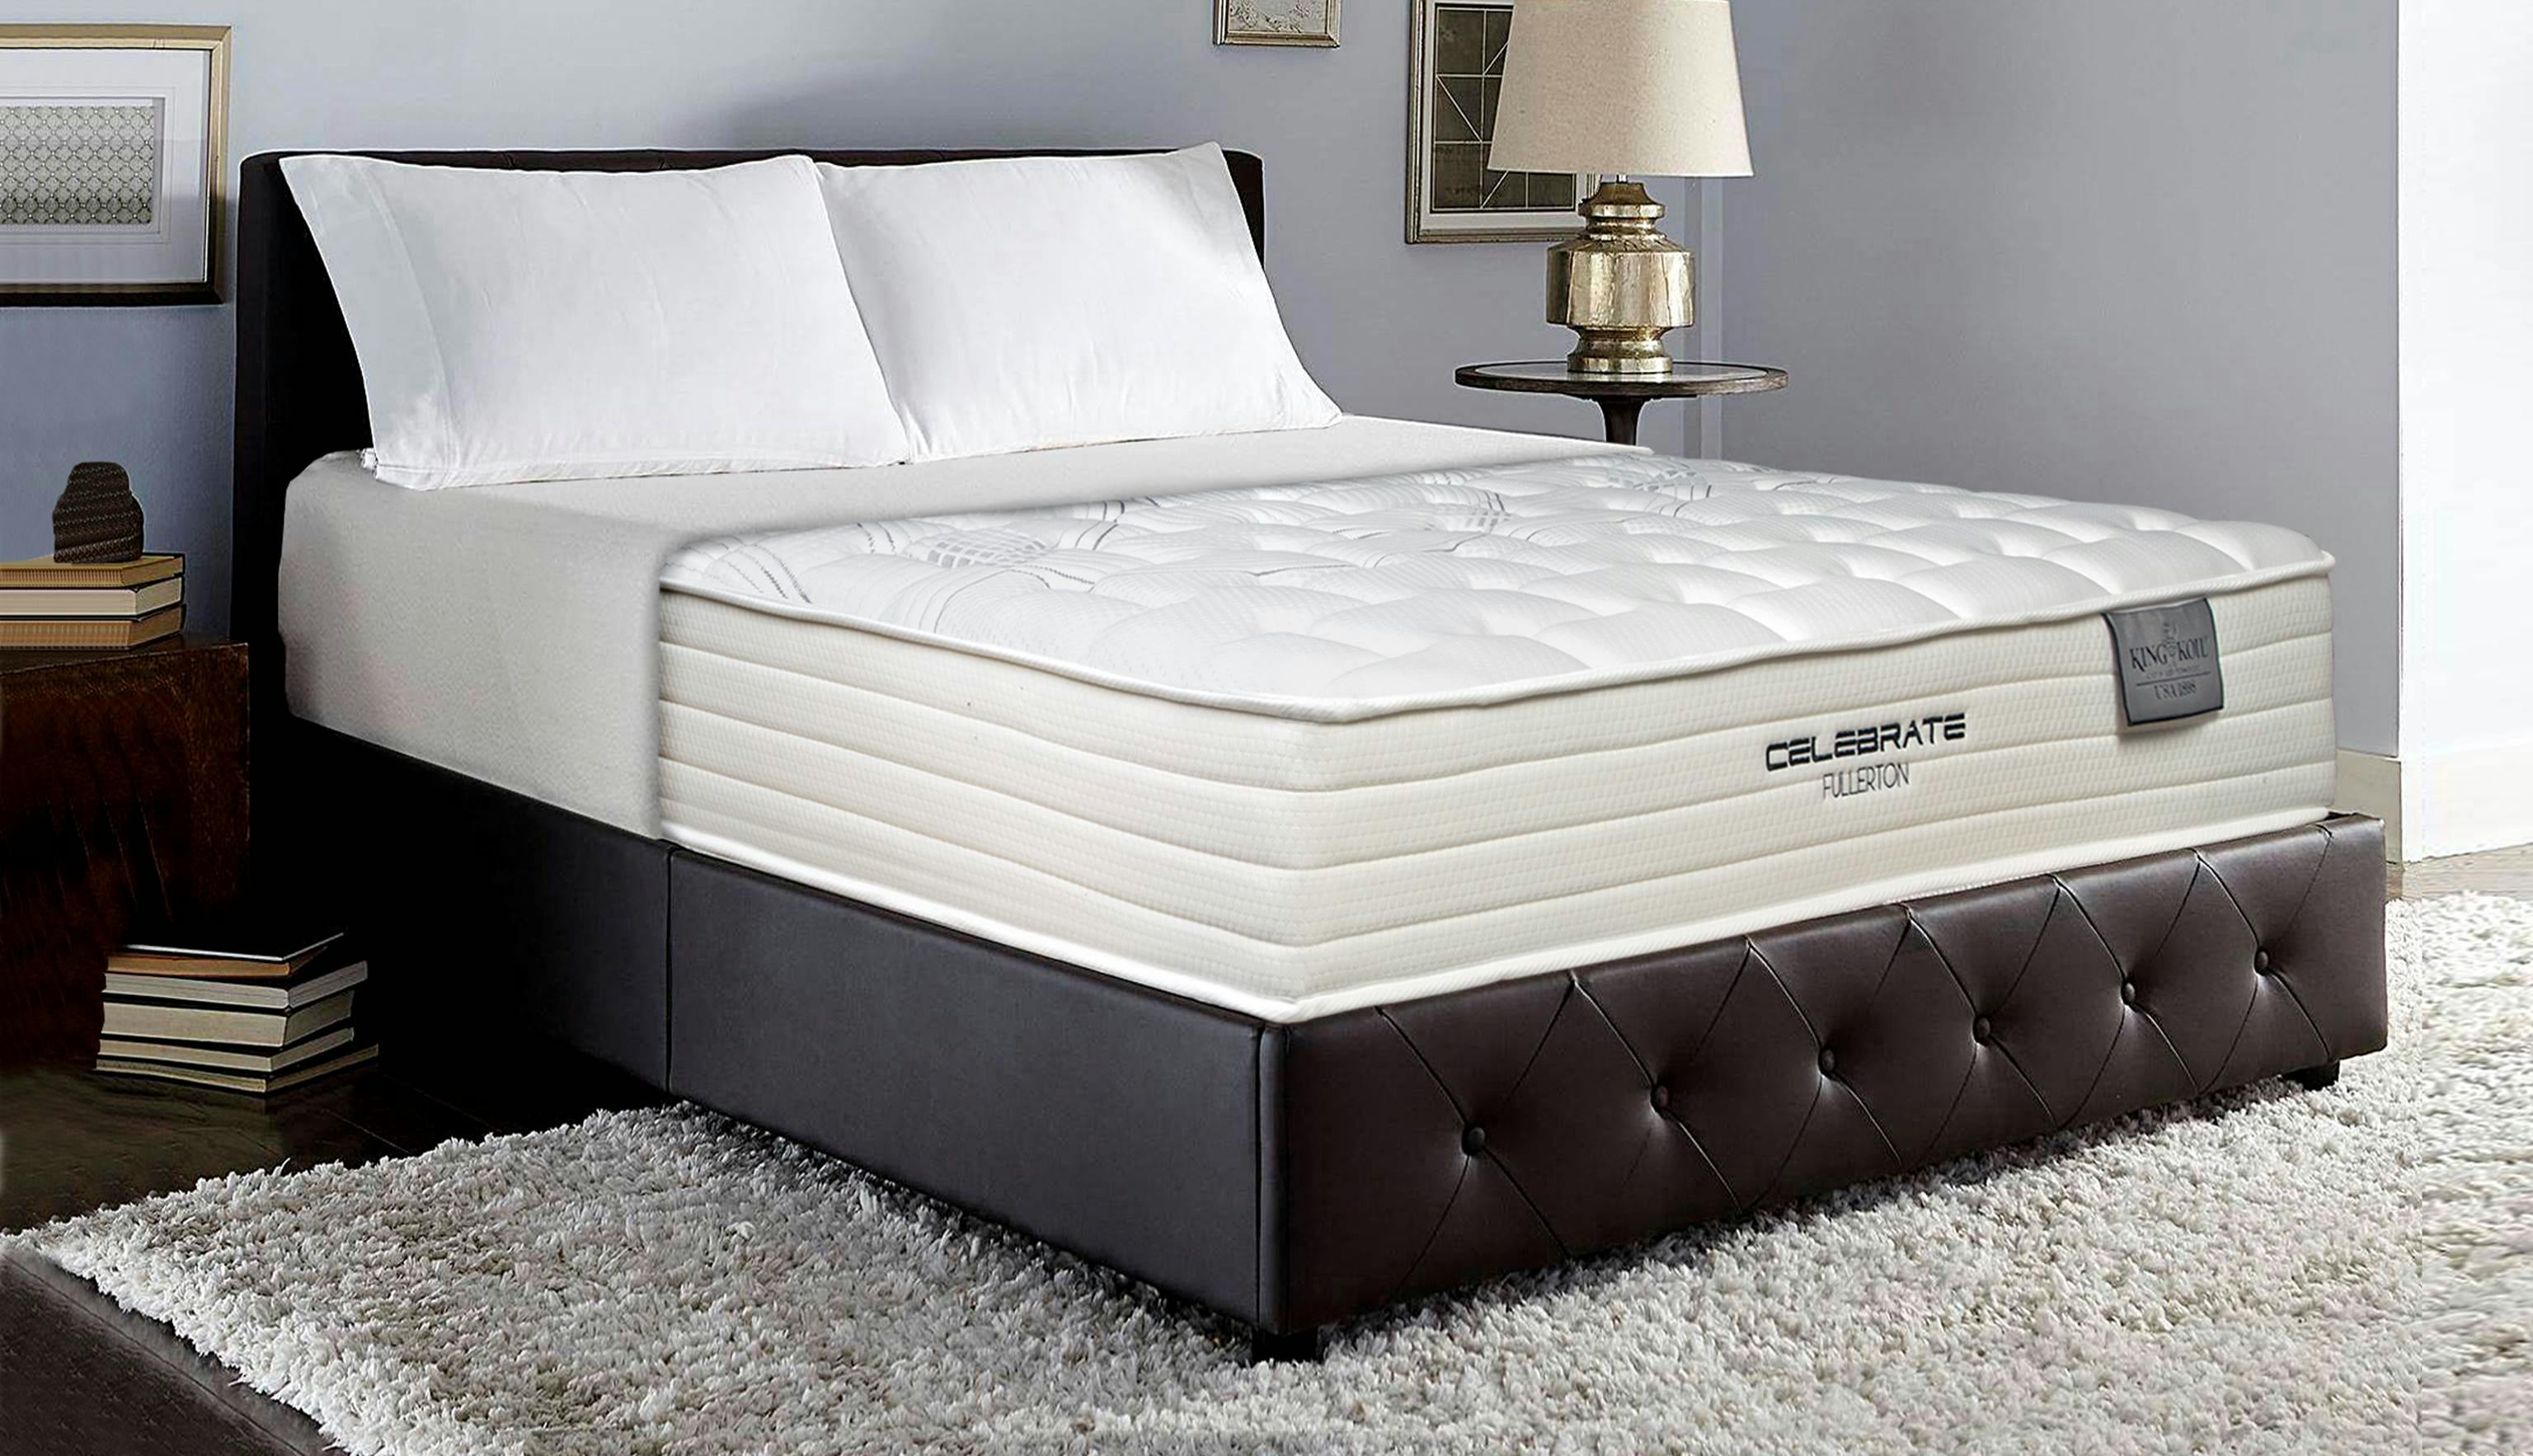 King Koil Celebration Fullerton Pocketed Spring Mattress   Queen Size  ?fit=fill&bg=0FFF&w=3072&h=1766&auto=format,compress